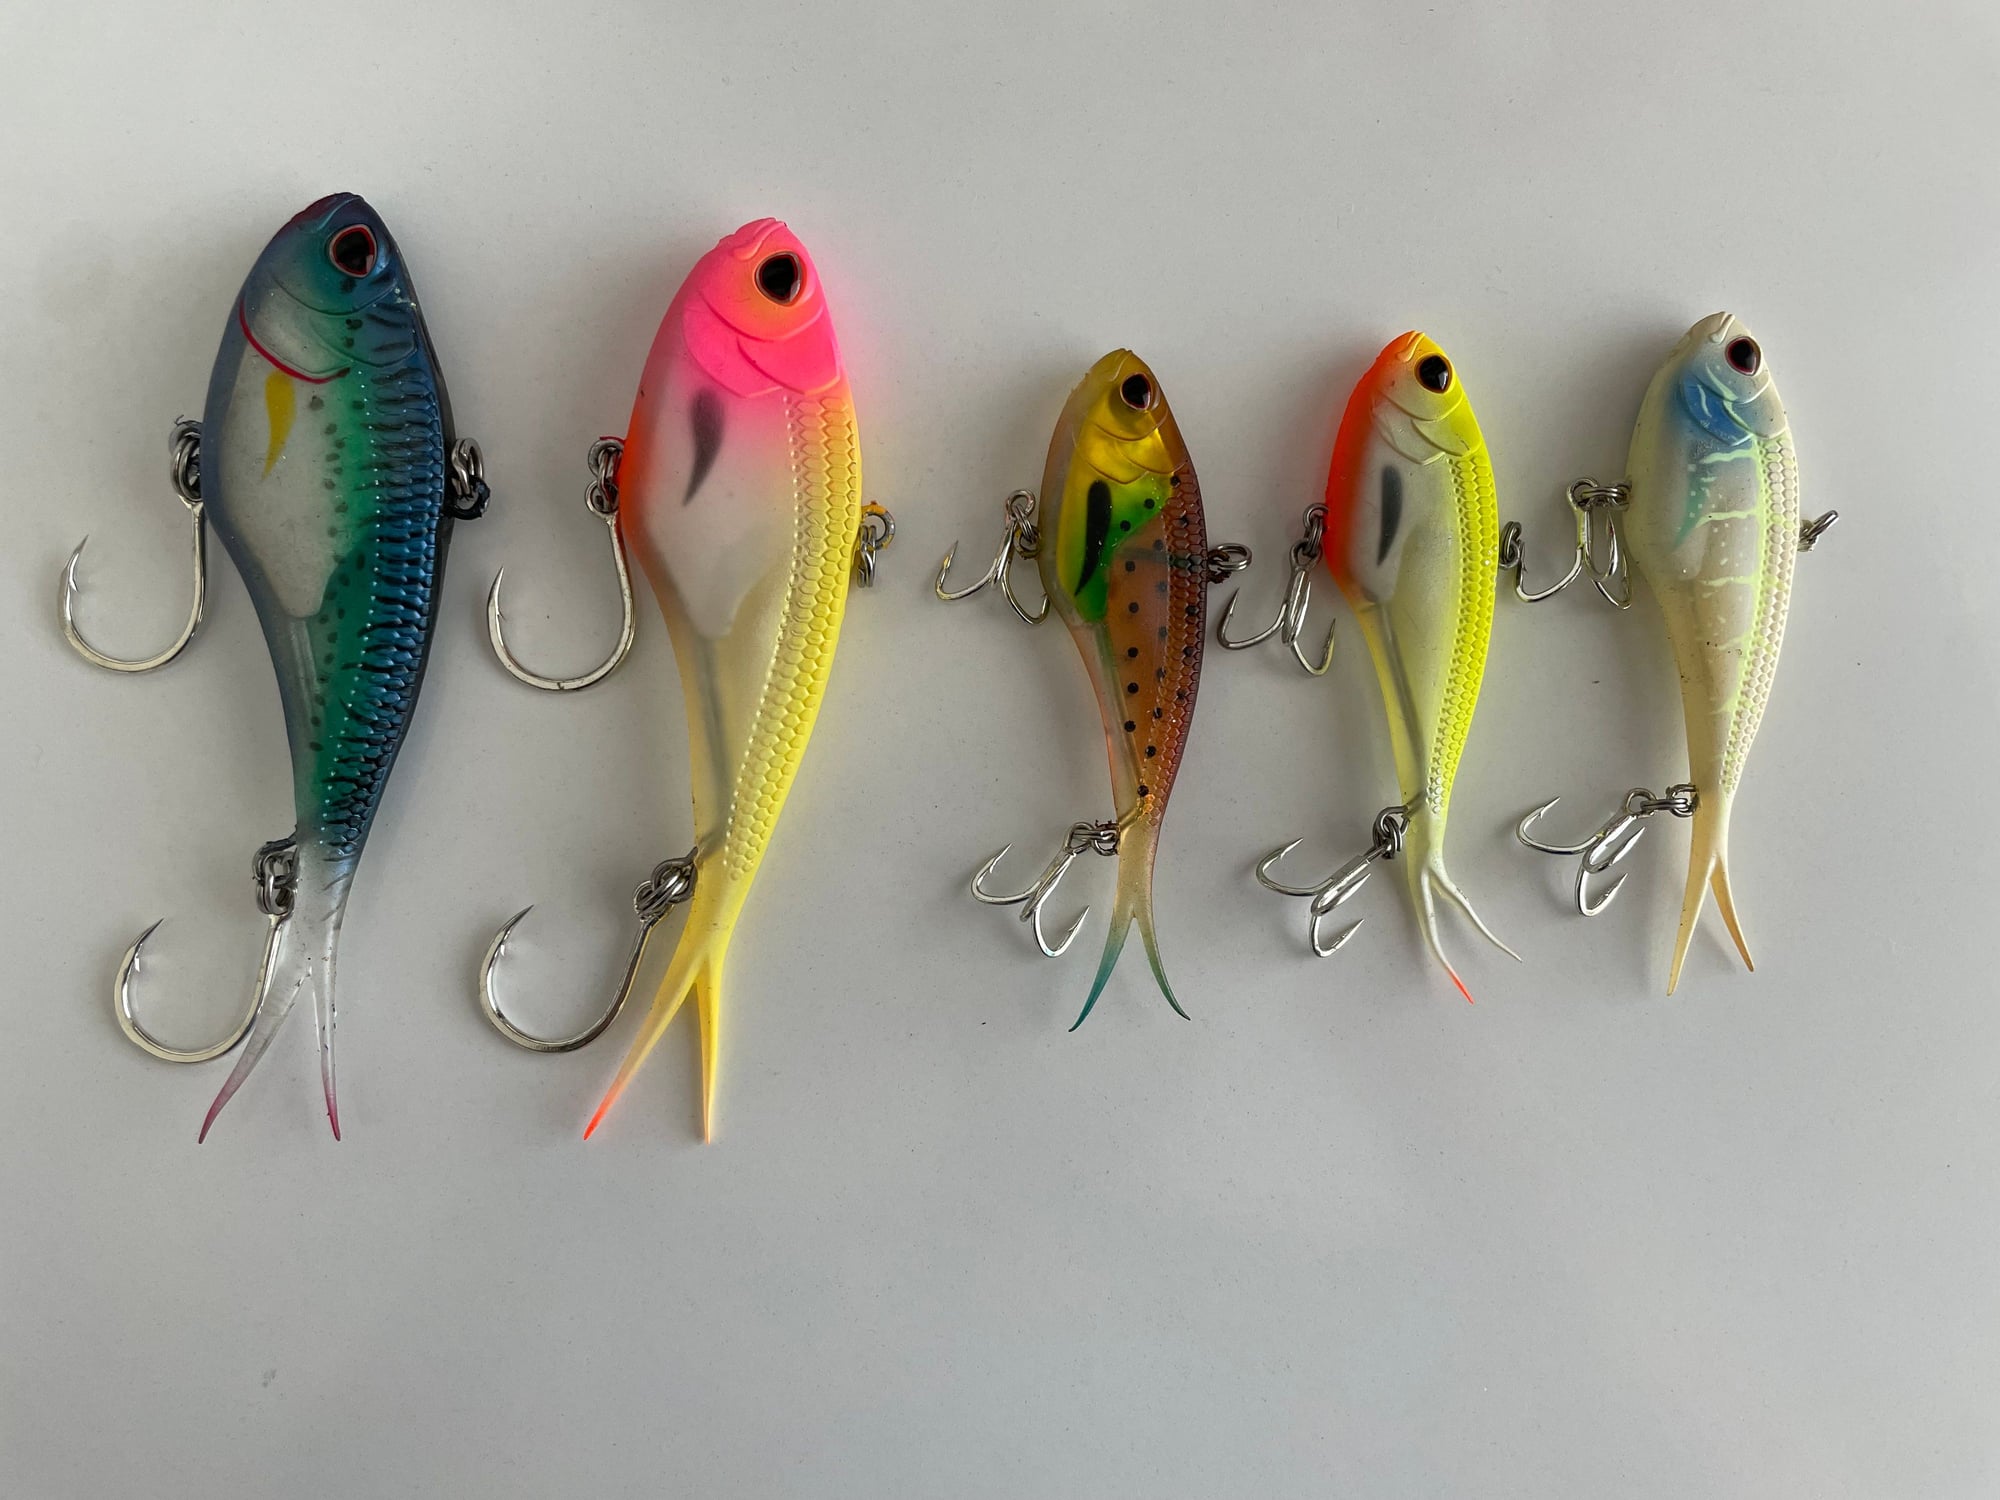 Slow pitch jigging gear - The Hull Truth - Boating and Fishing Forum